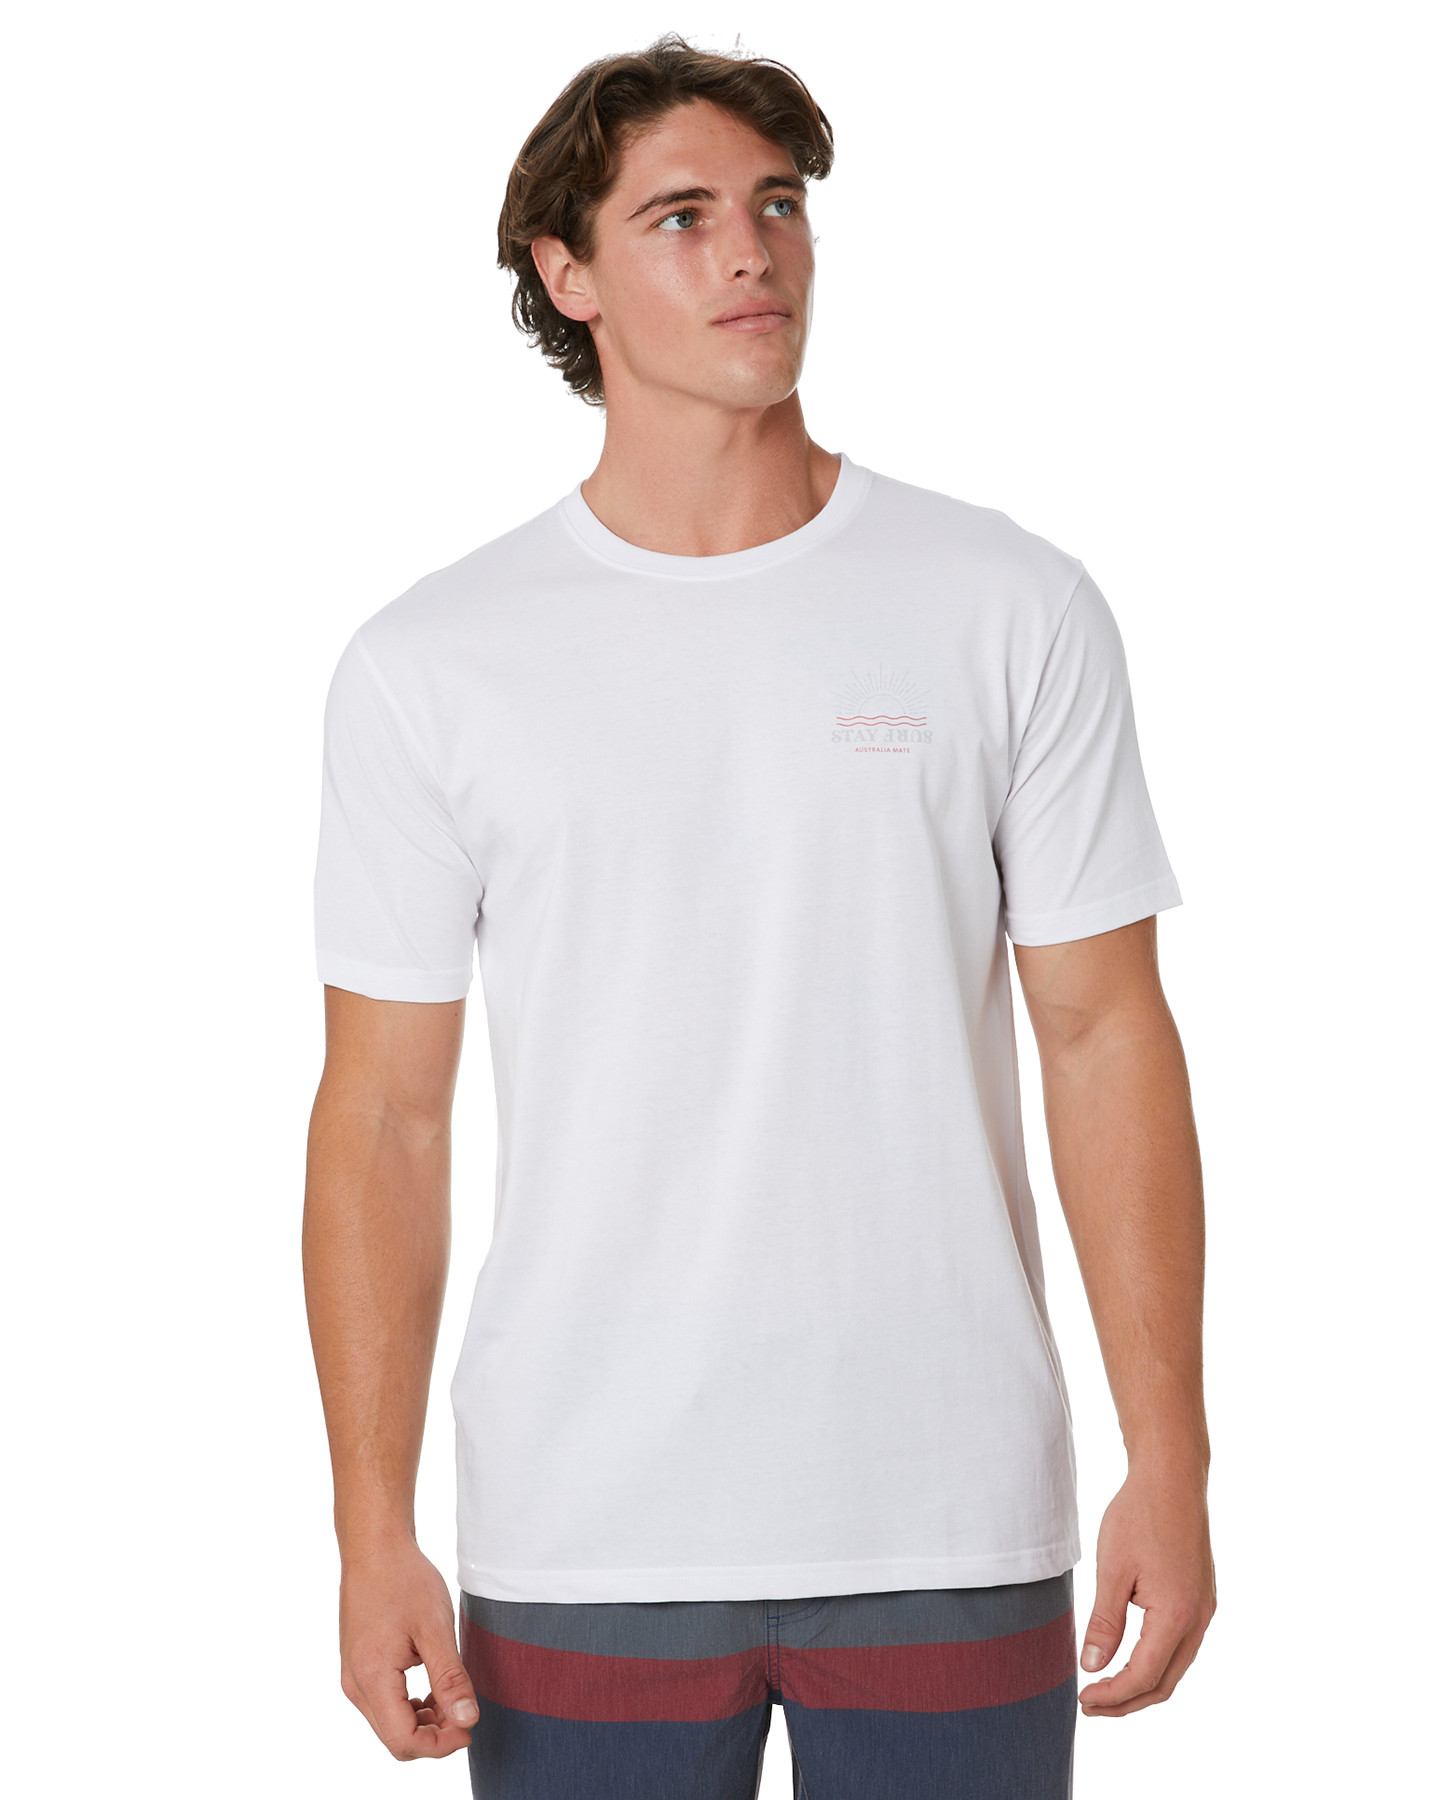 Stay Shiner Mens Tee - White | SurfStitch